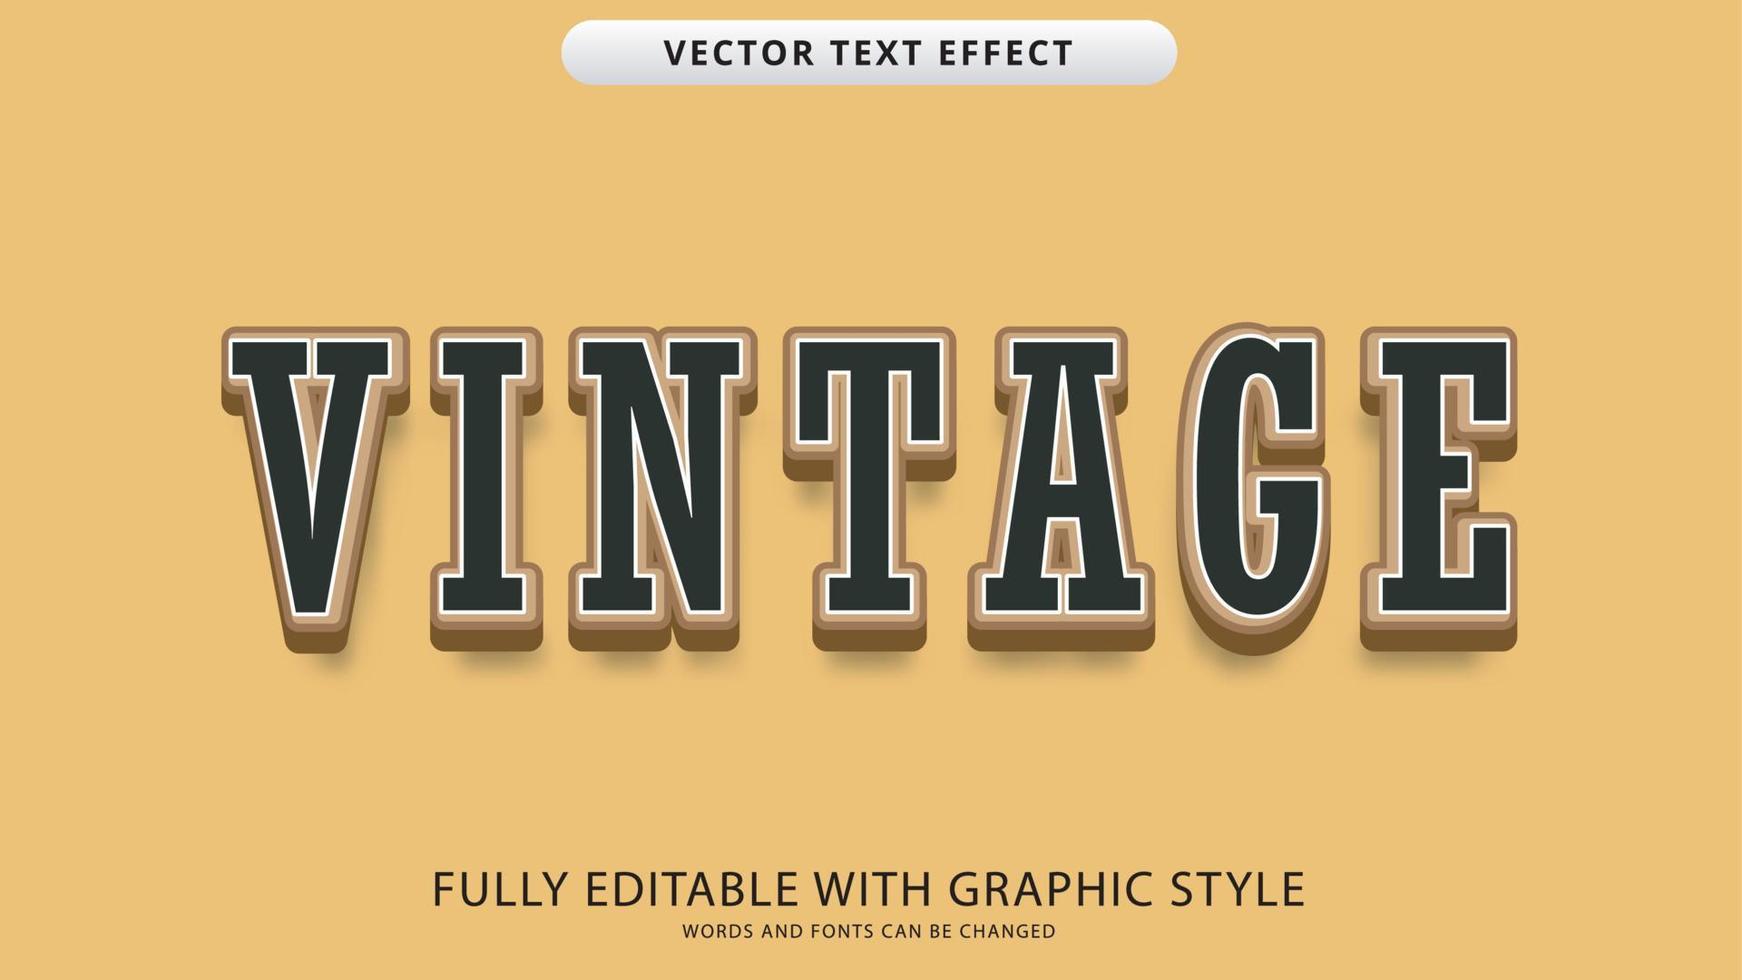 vintage text effect editable with graphic style vector